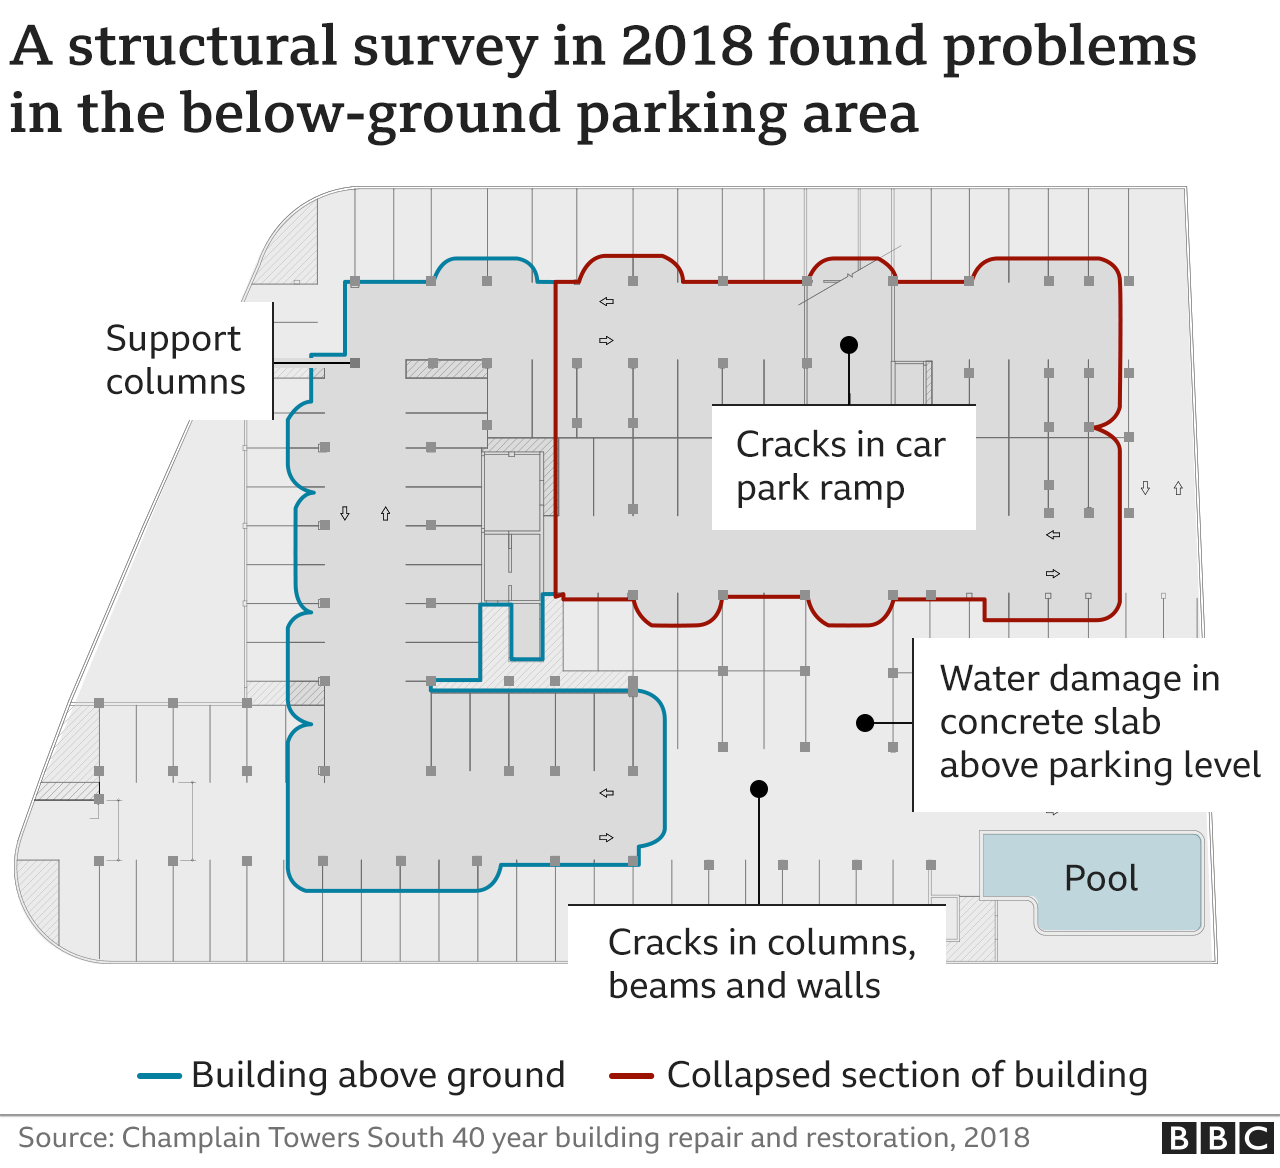 Basement parking floor plan shows problems highlighted in the report